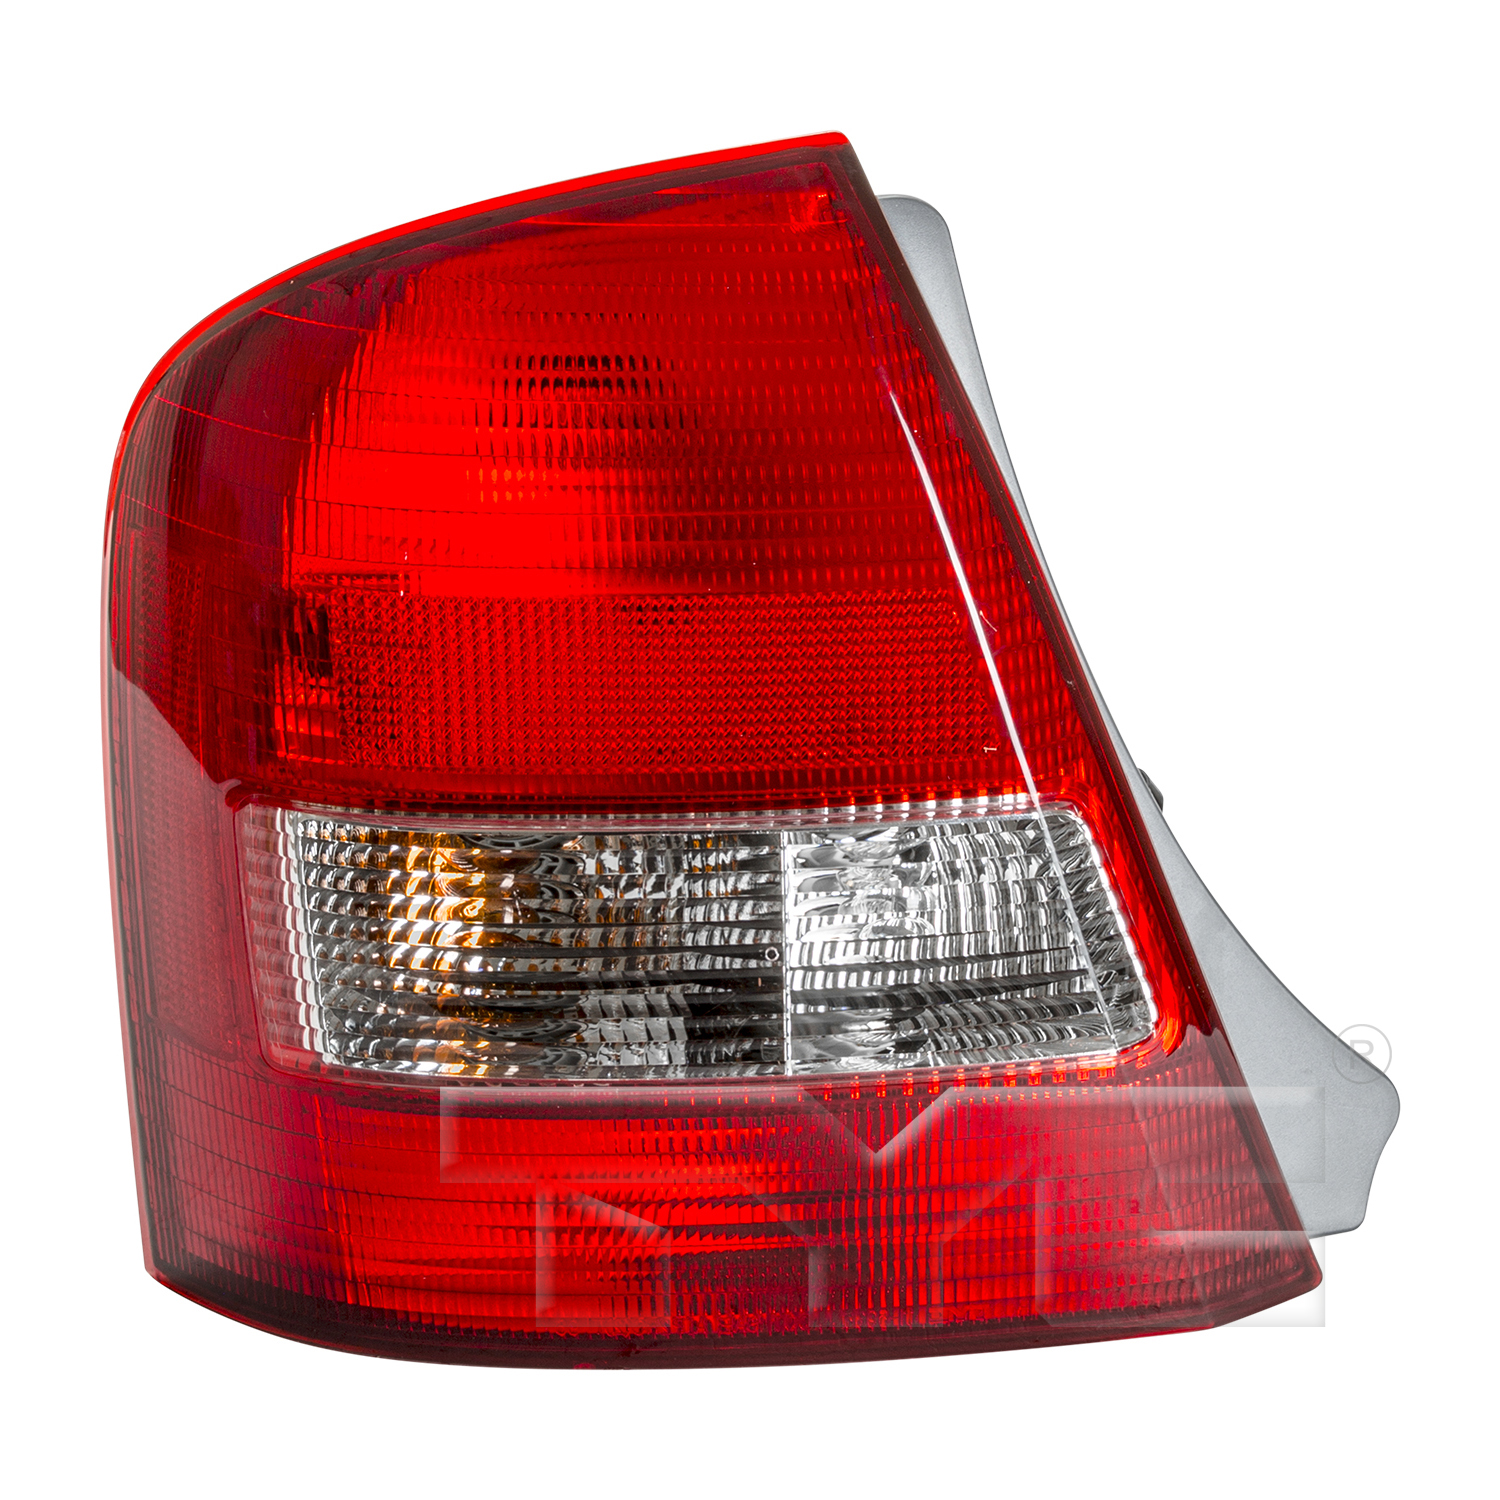 Aftermarket TAILLIGHTS for MAZDA - PROTEGE, PROTEGE,99-01,LT Taillamp assy